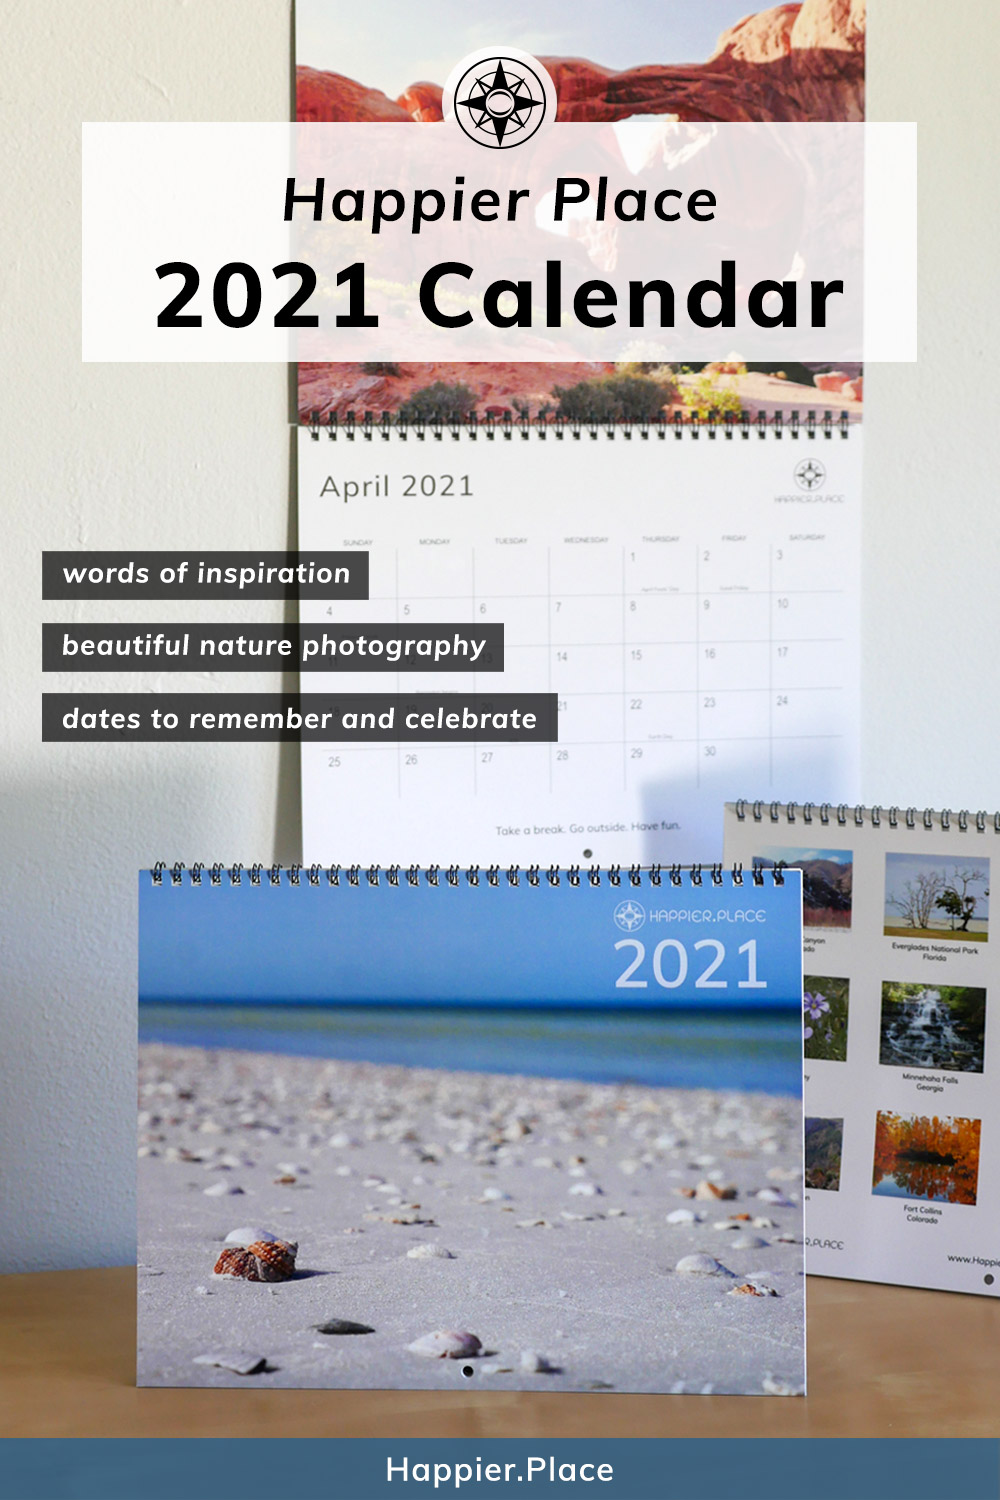 2021 Happier Place calendar featuring nature photography, from bright beaches to deep canyons and full of words of inspiration.